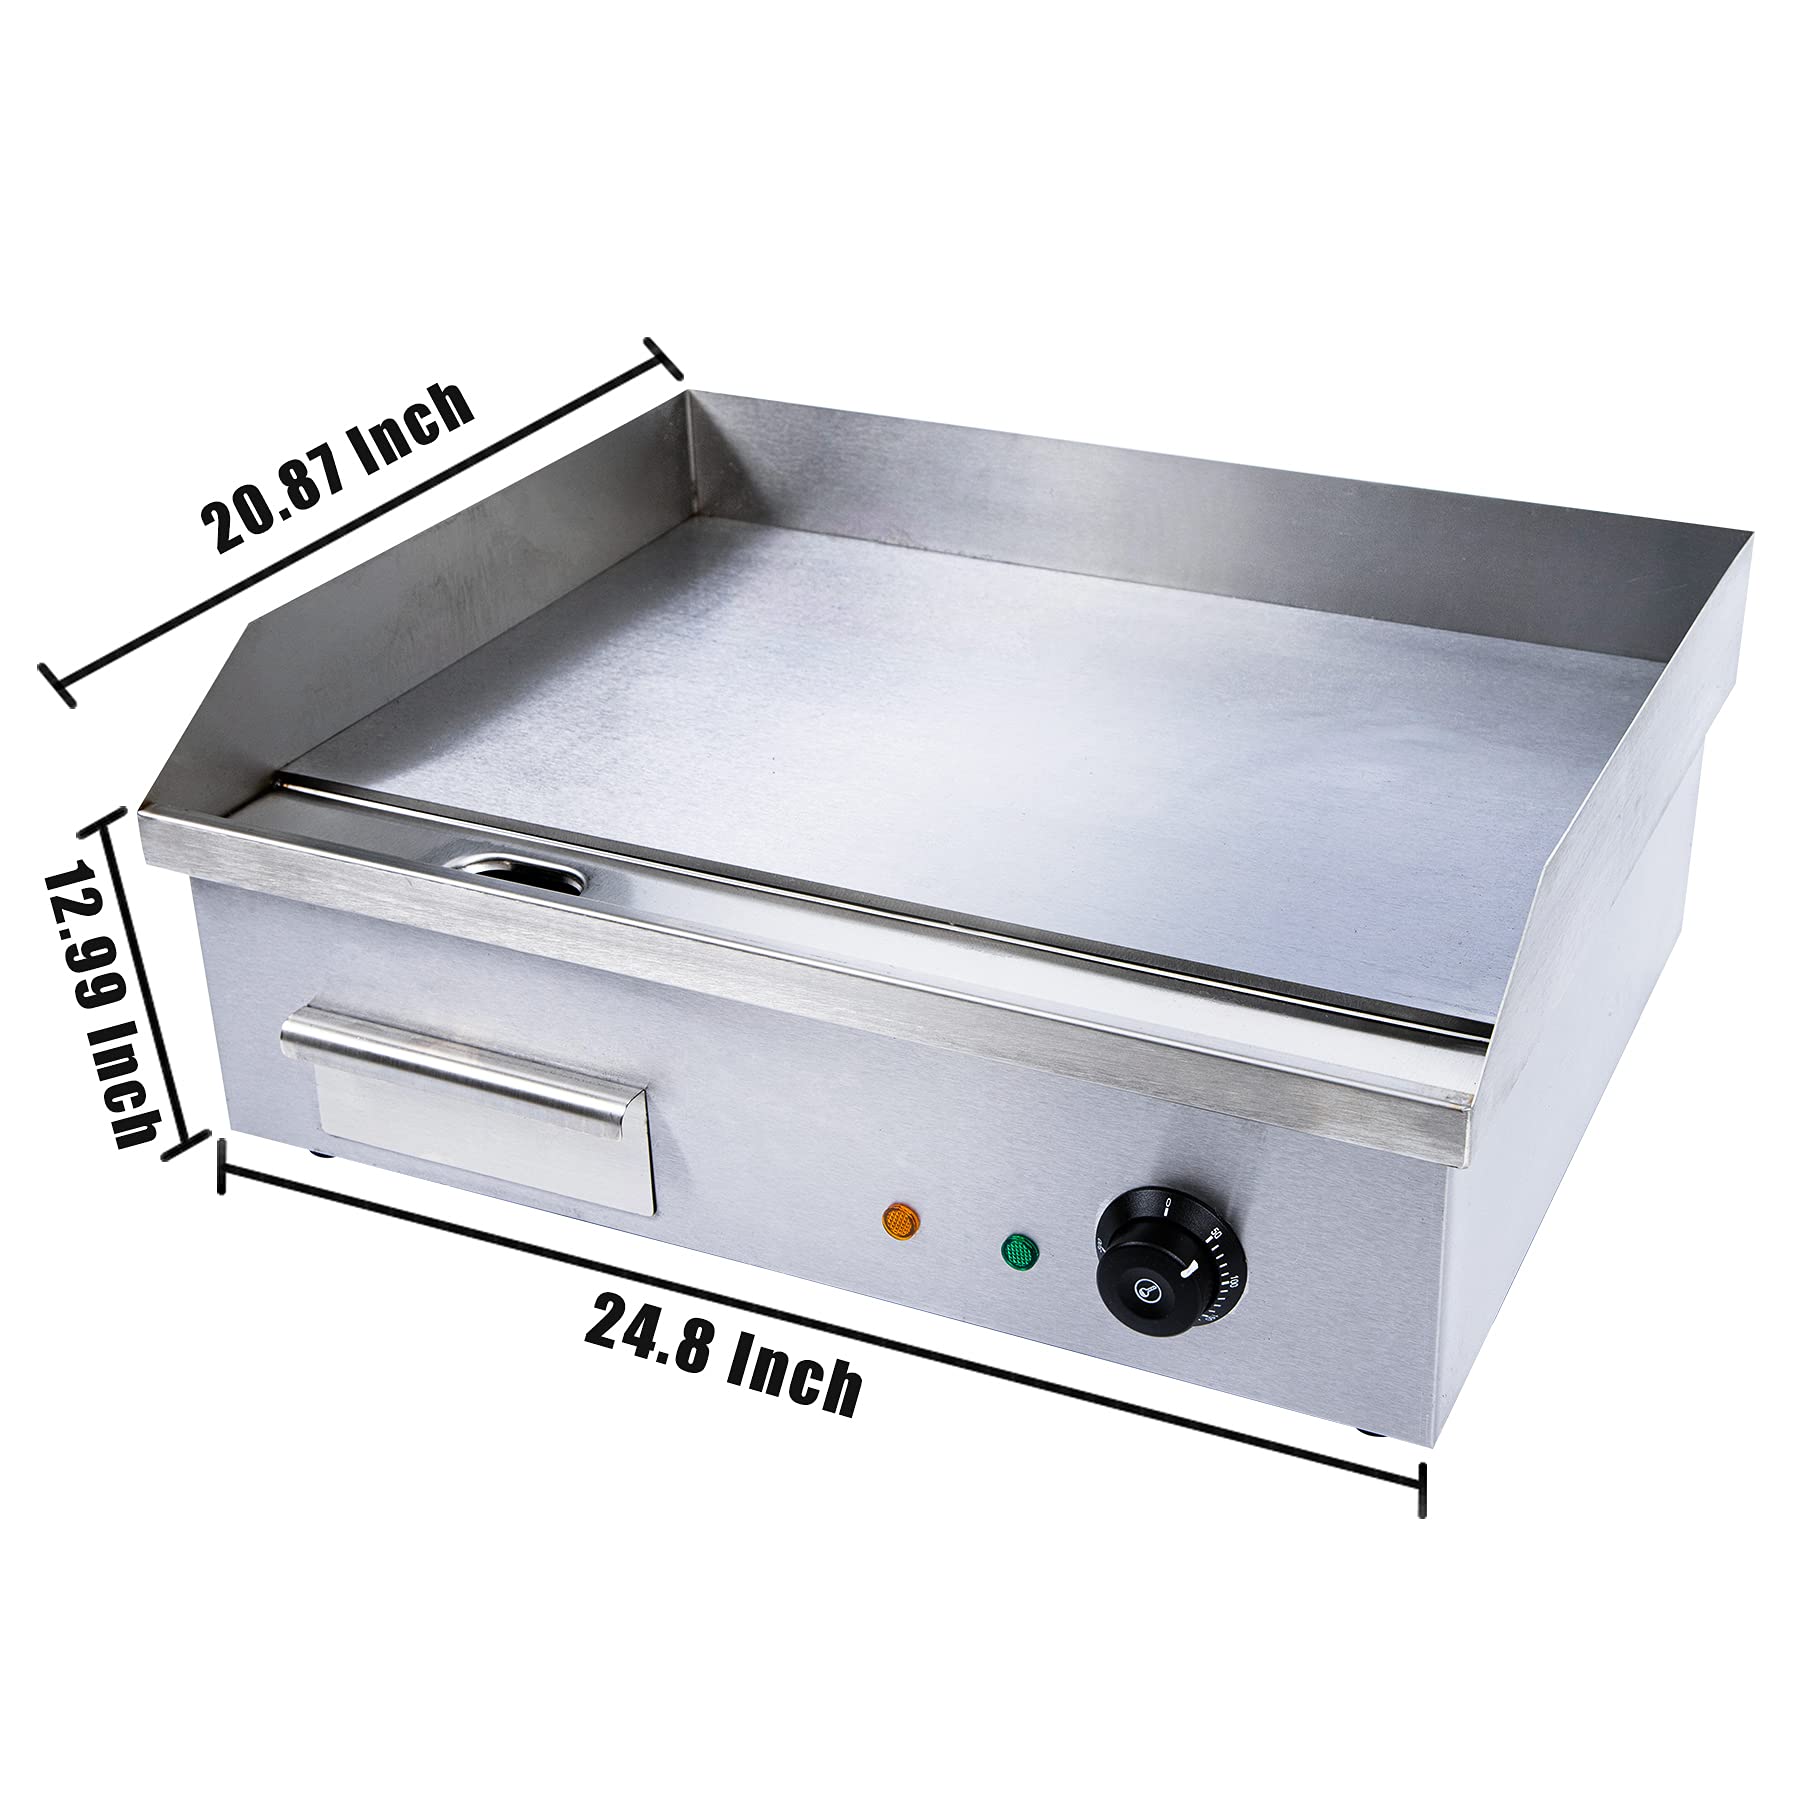 TBVECHI Teppanyaki, Electric Griddle Cooktop Countertop Commercial Flat Top Grill Griddles BBQ Plate Grill Thermostatic Control